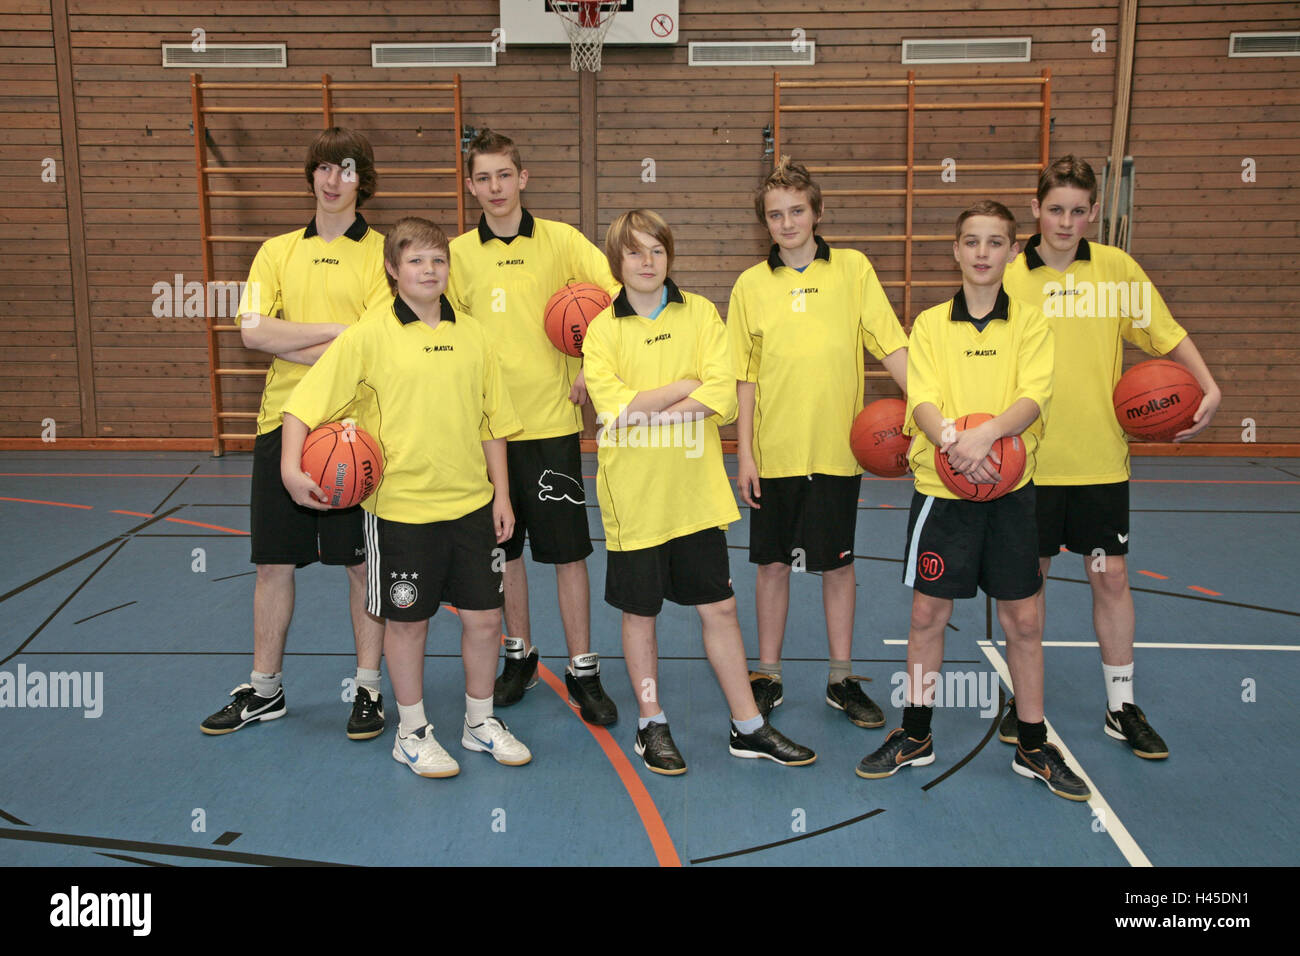 Gymnasium, school sport, boy, basketball, team, balls, hold, model released, people, inside, school, seven, team, group, team's recording, basketball, team's jerseys, youth, sport, school sport, team, training, condition, motion, perseverance, sports club, togetherness, social behaviour, fairness, team sport, sport, ball game, whole body, Stock Photo